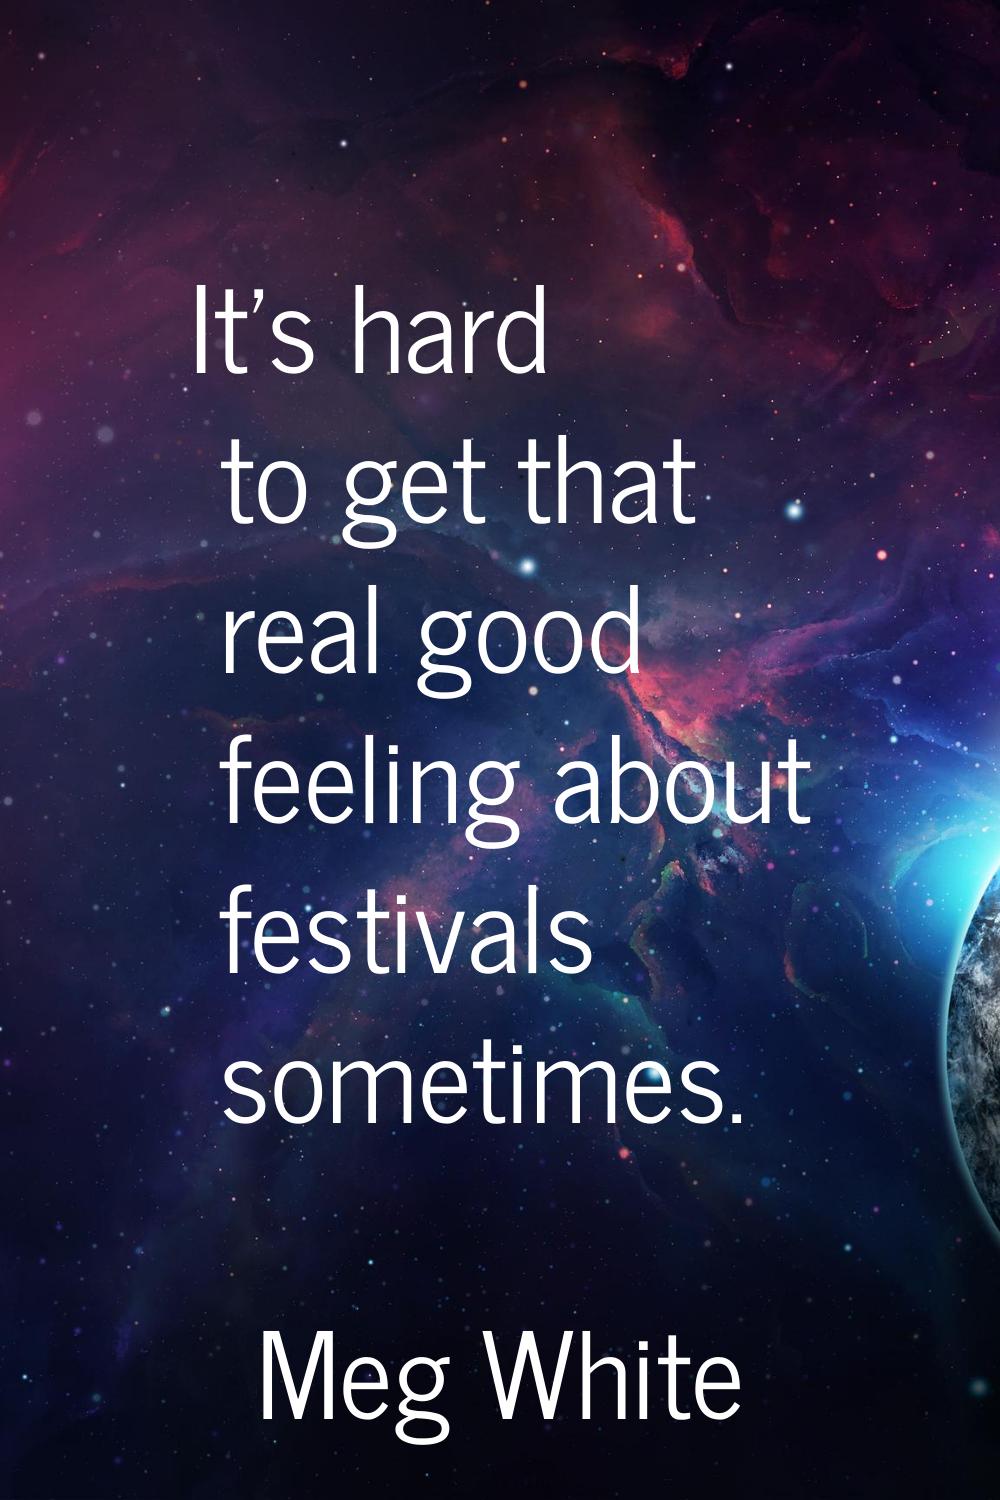 It's hard to get that real good feeling about festivals sometimes.